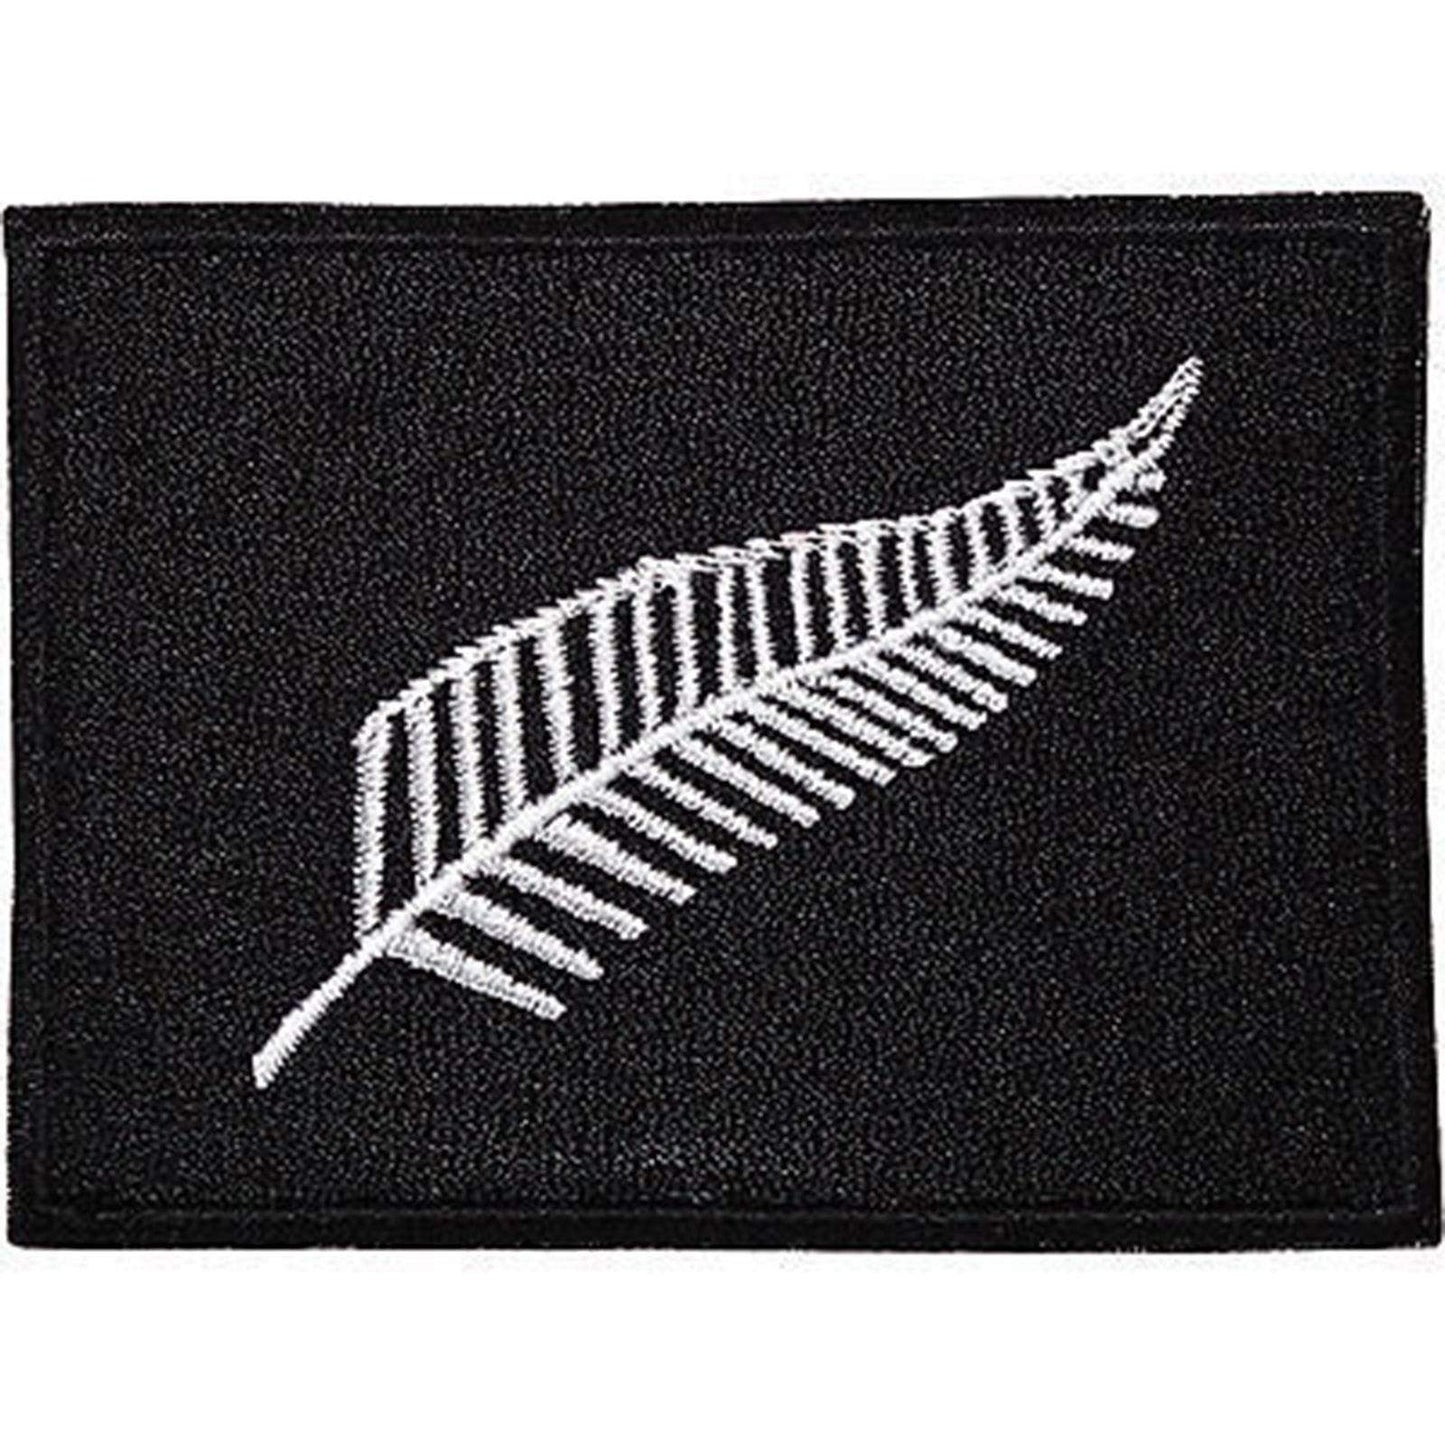 New Zealand Silver Fern Flag Patch Embroidered Iron / Sew On Bag T Shirt Badge